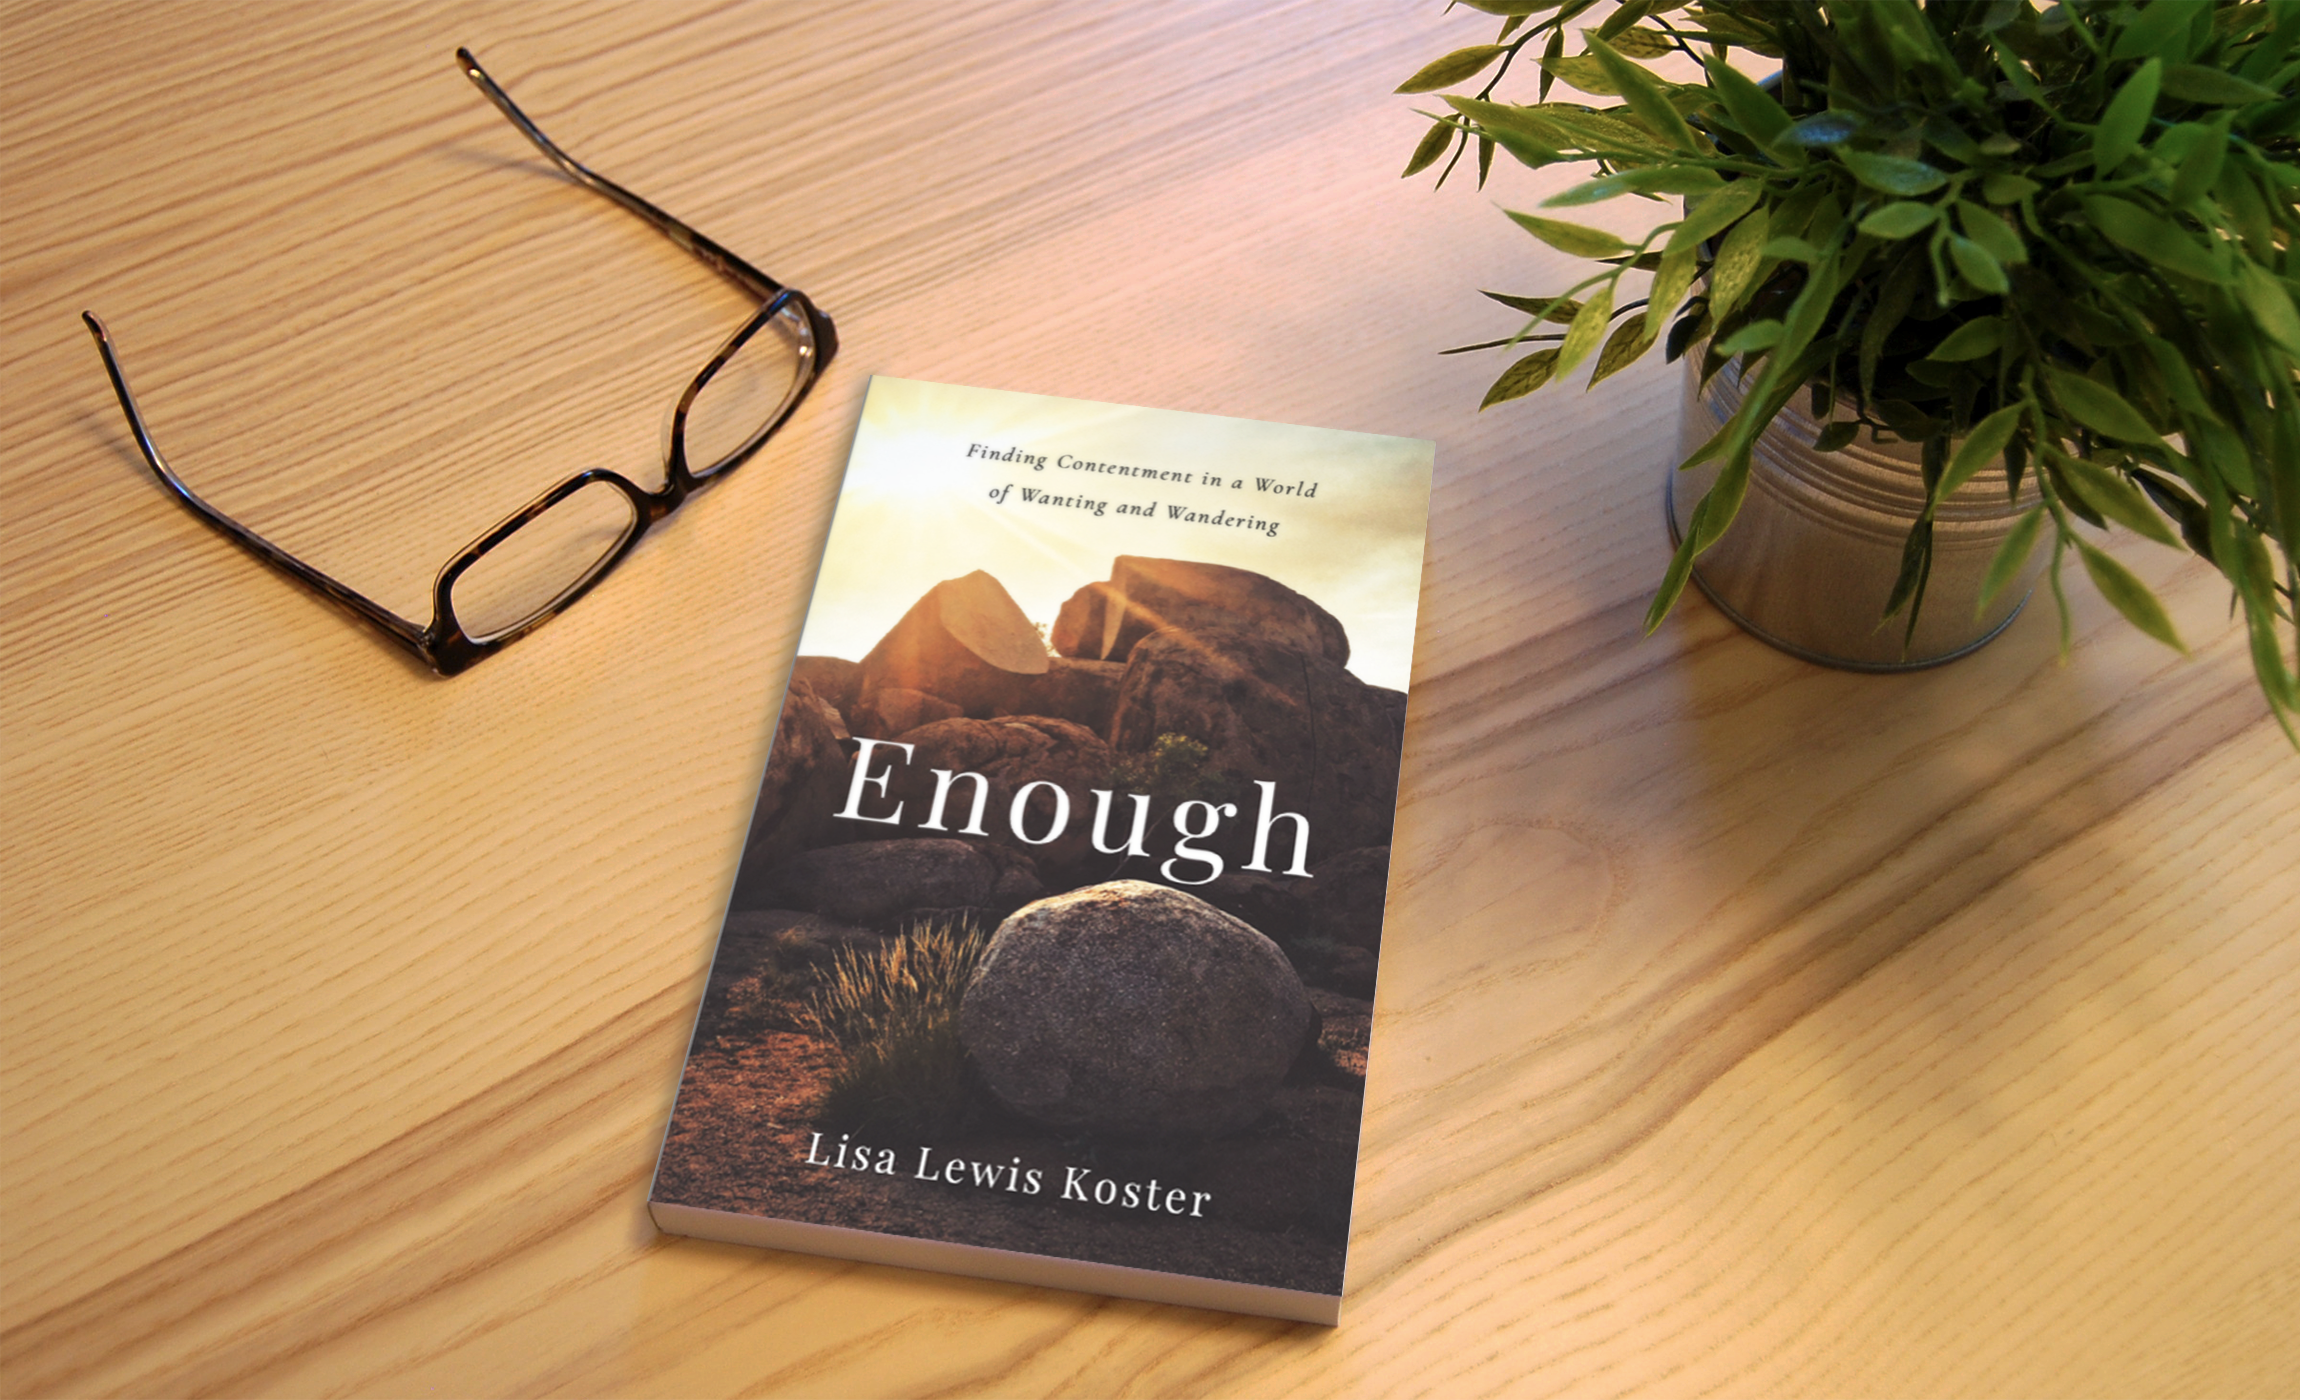 Enough by Lisa Lewis Koster on a wooden table beside a pair of glasses